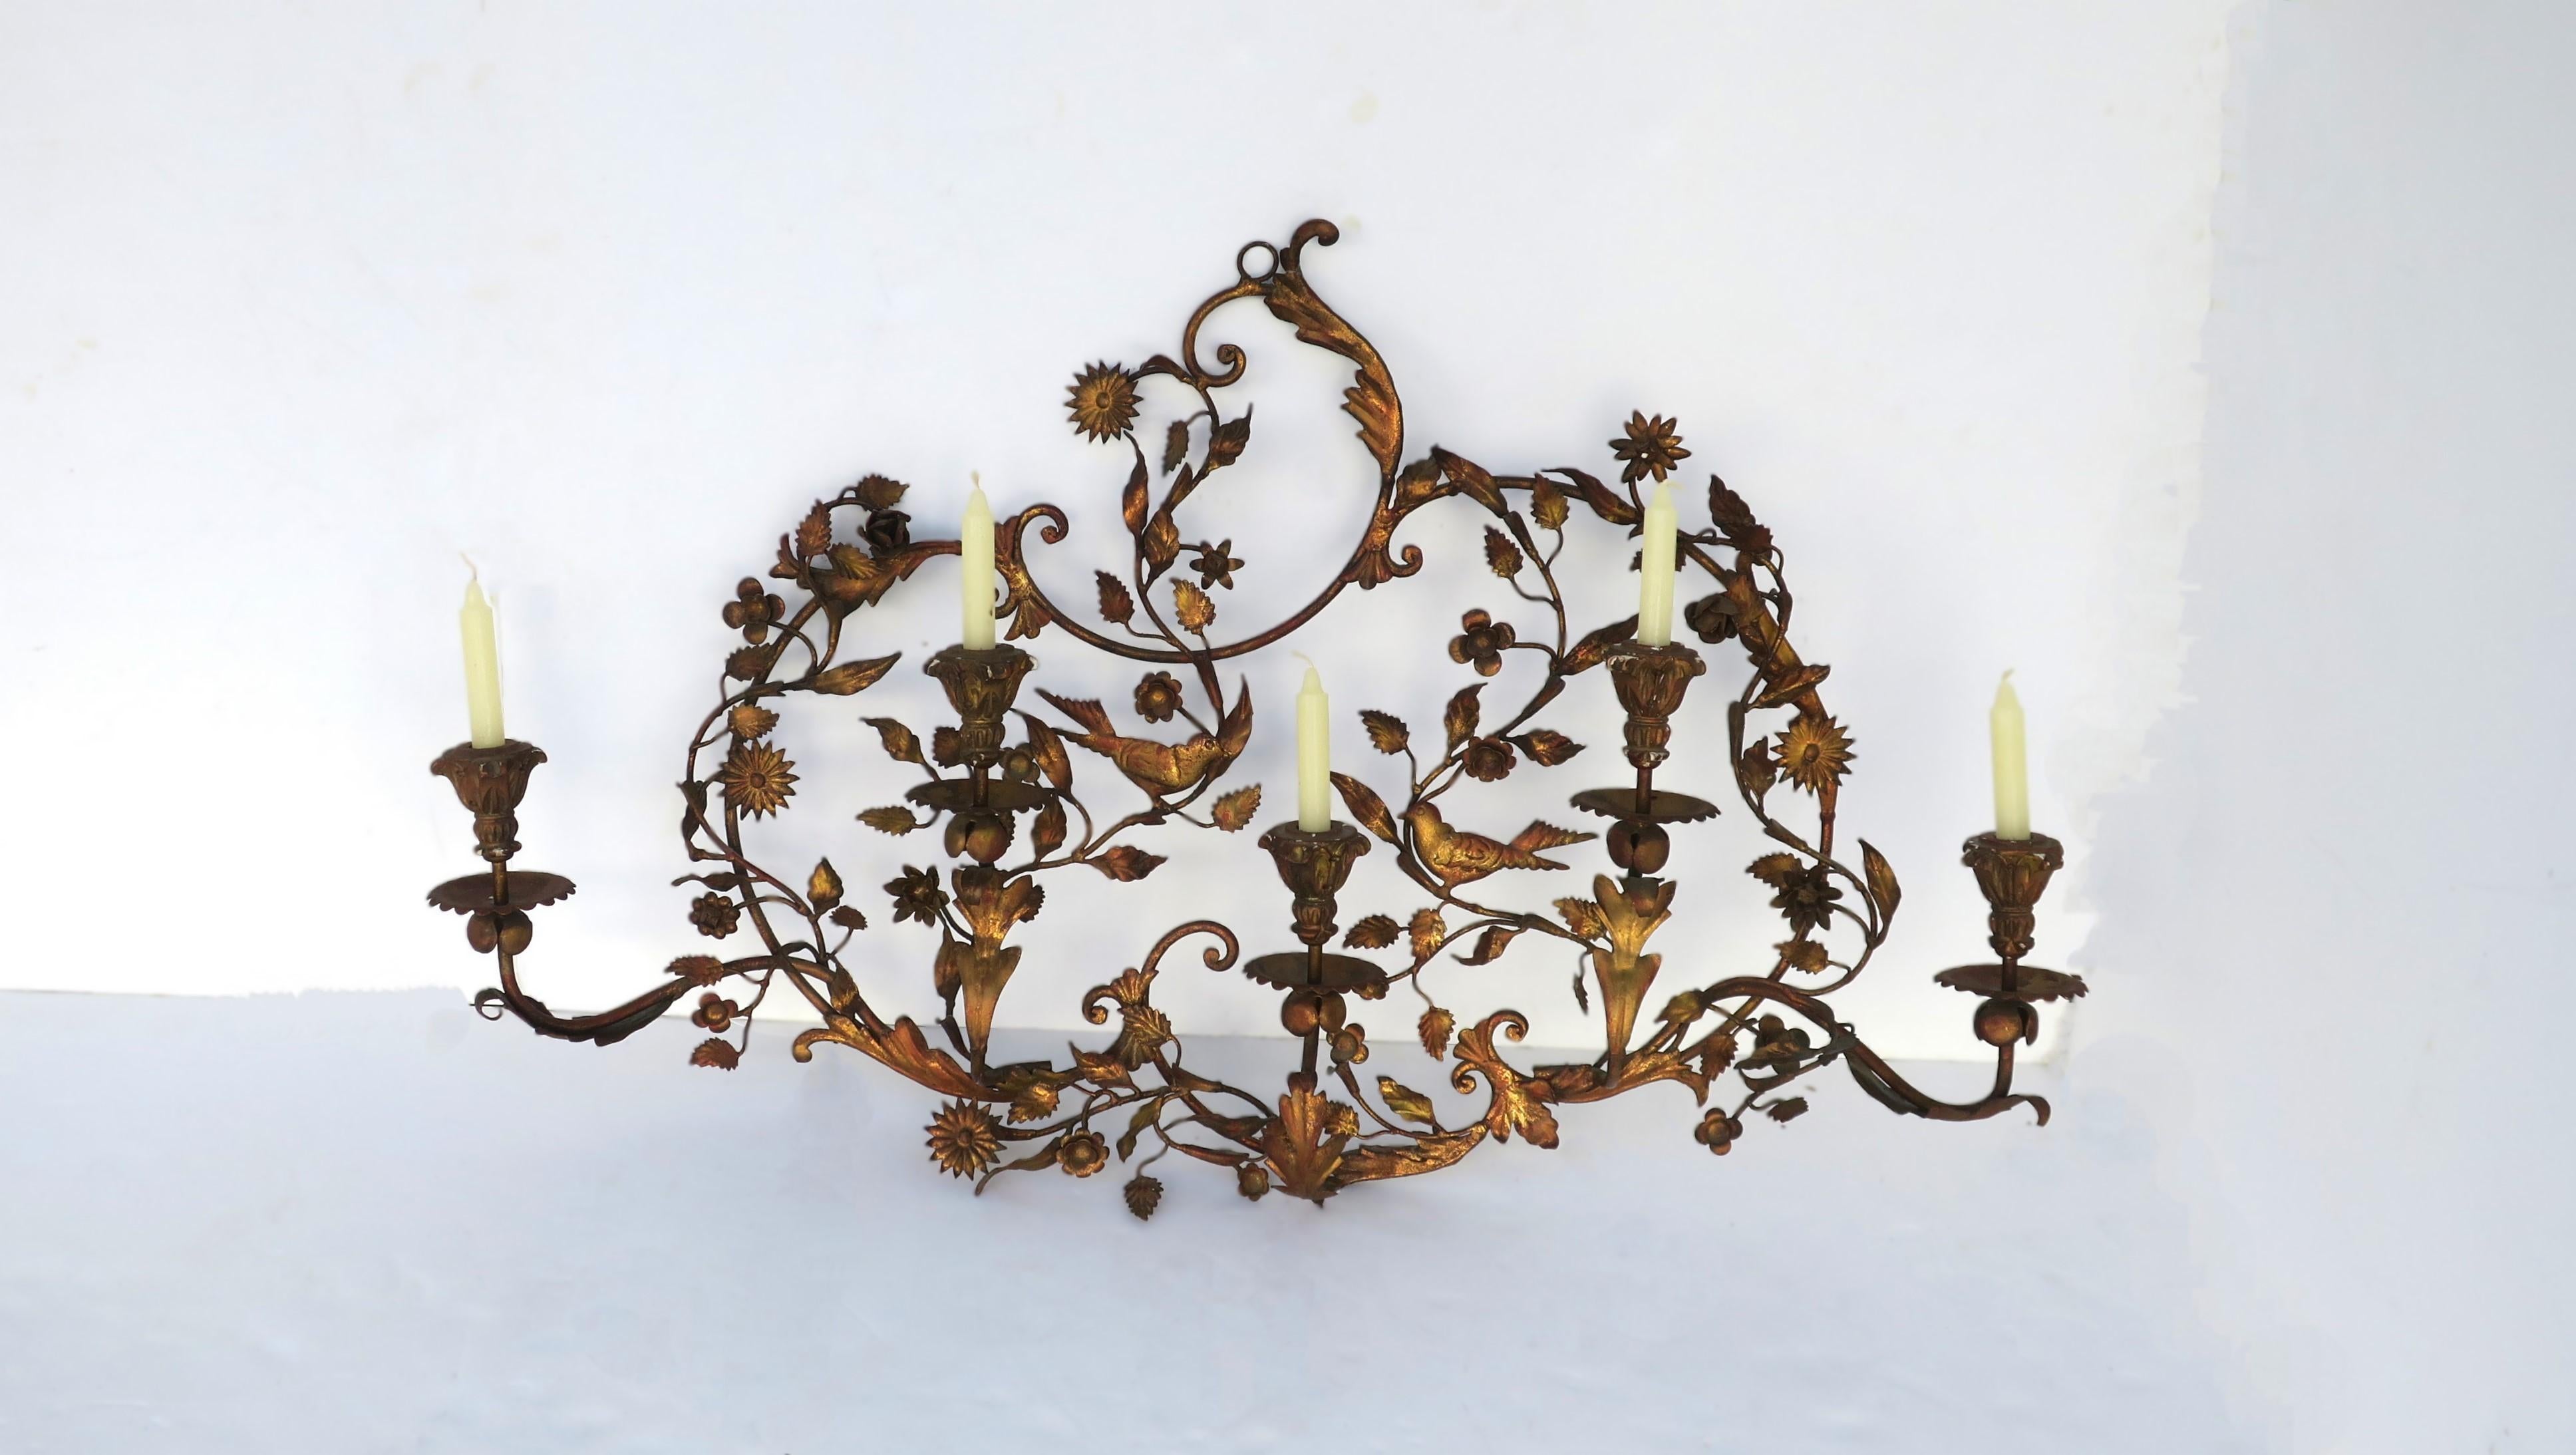 An Italian gold gilt tole metal wall candelabra with birds, flowers and leaves, in the Rococo style, circa early-20th century, Italy. A beautiful and relatively large-scale gold gilt tole metal wall relief of birds, flowers, and leaves, accompanied